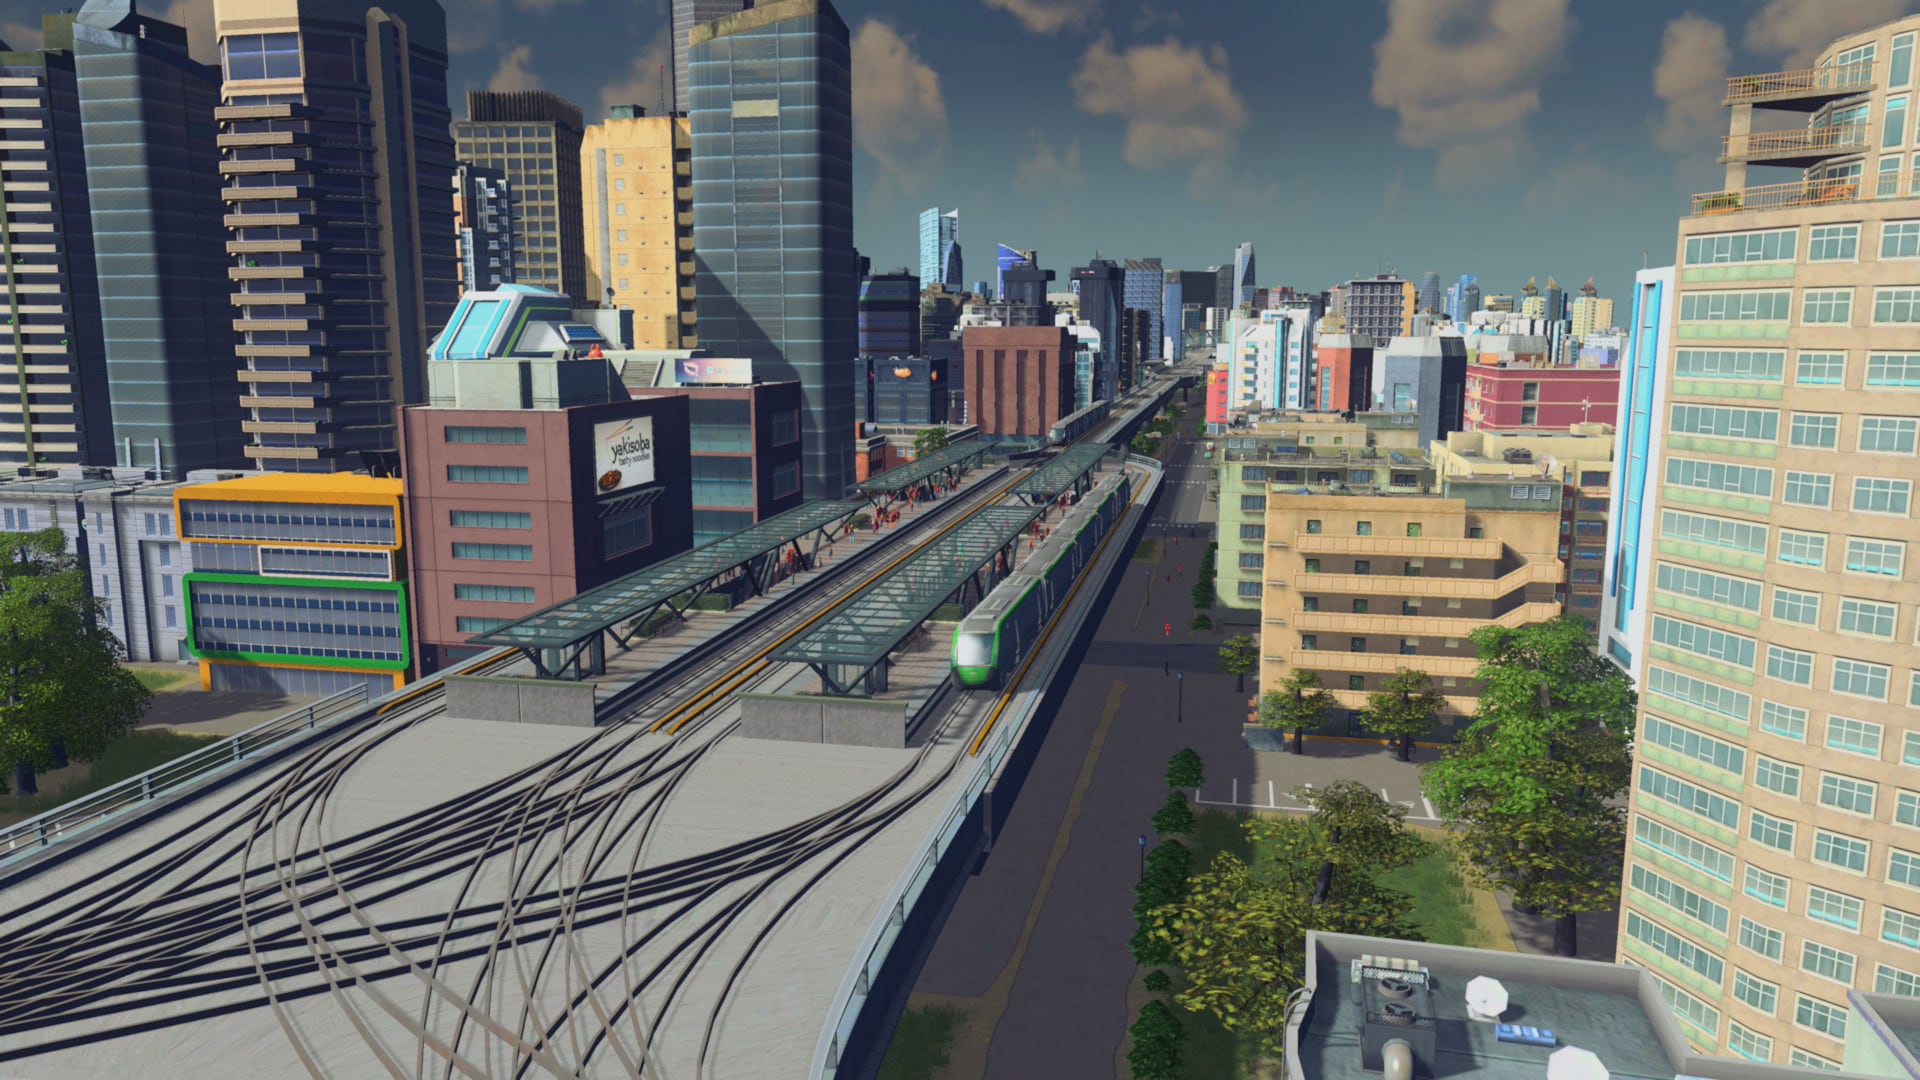 Buy Cities Skylines Content Creator Pack Train Stations Pc Steam Key Global Cheap G2a Com